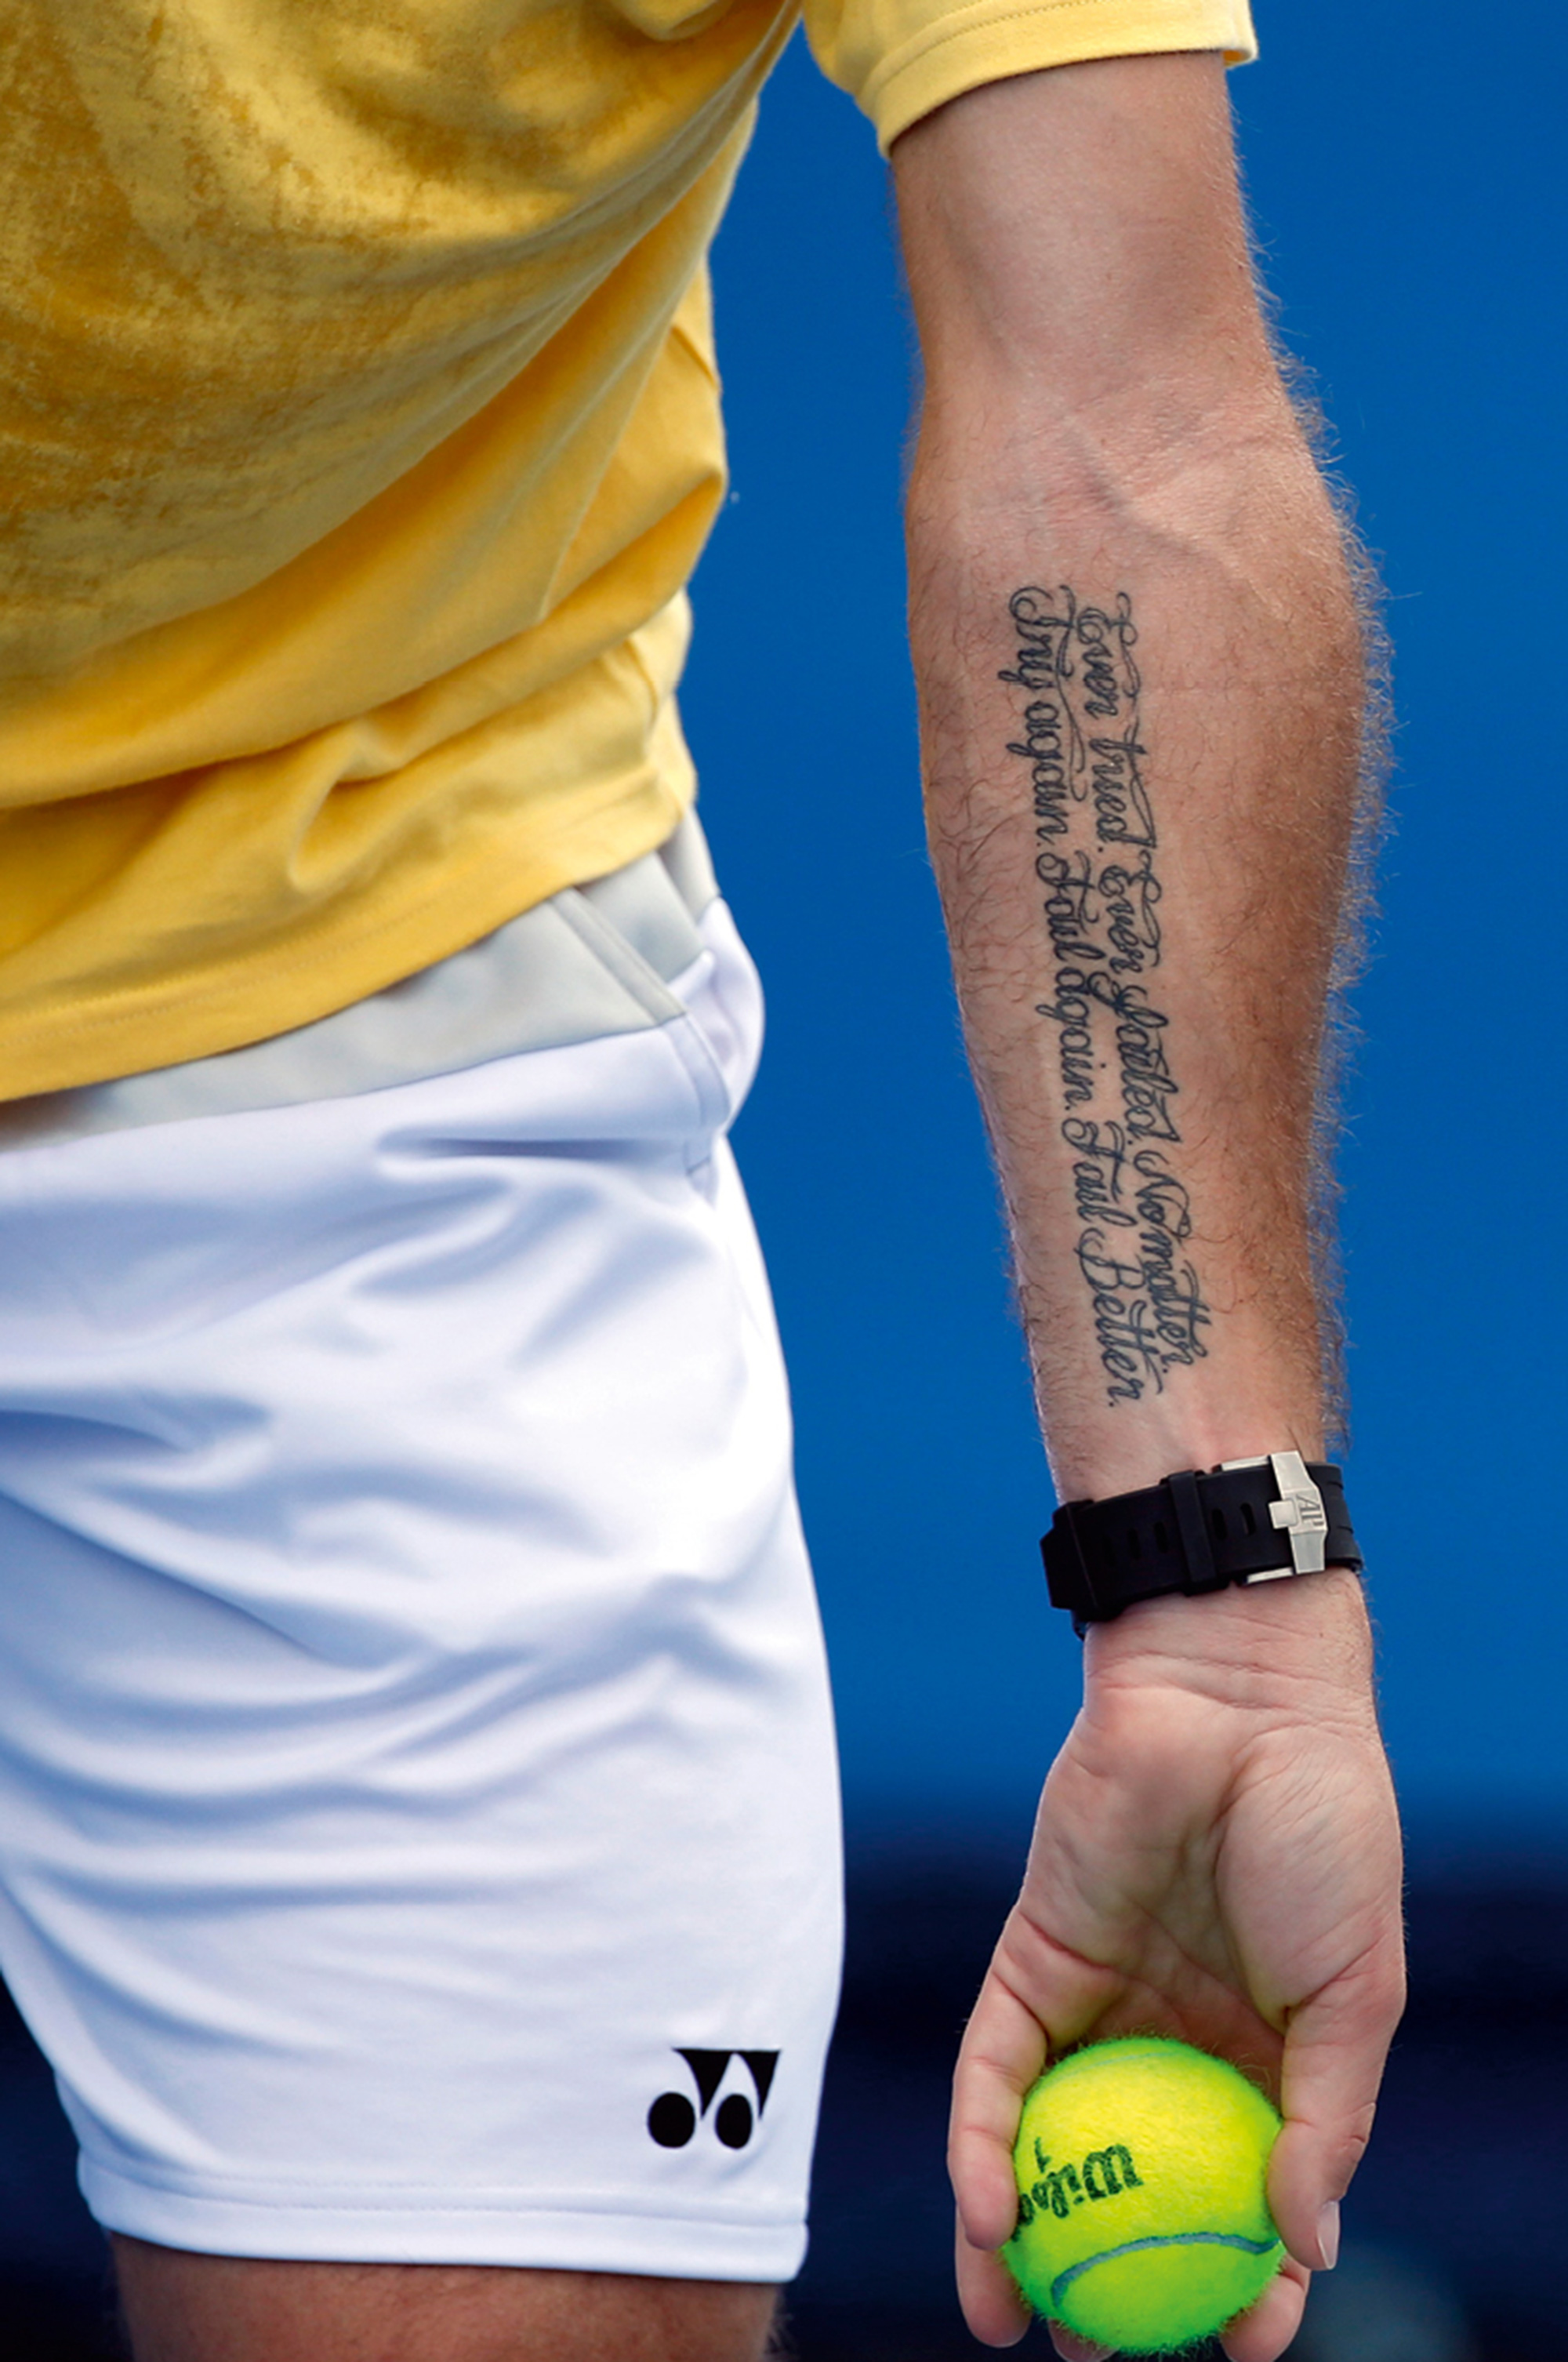 “A photograph of a quote from Samuel Beckett tattooed on the forearm of tennis player Stanislas Wawrinka, which reads “Ever tried. Ever failed. No Matter. Try again. Fail again. Fail better.” 